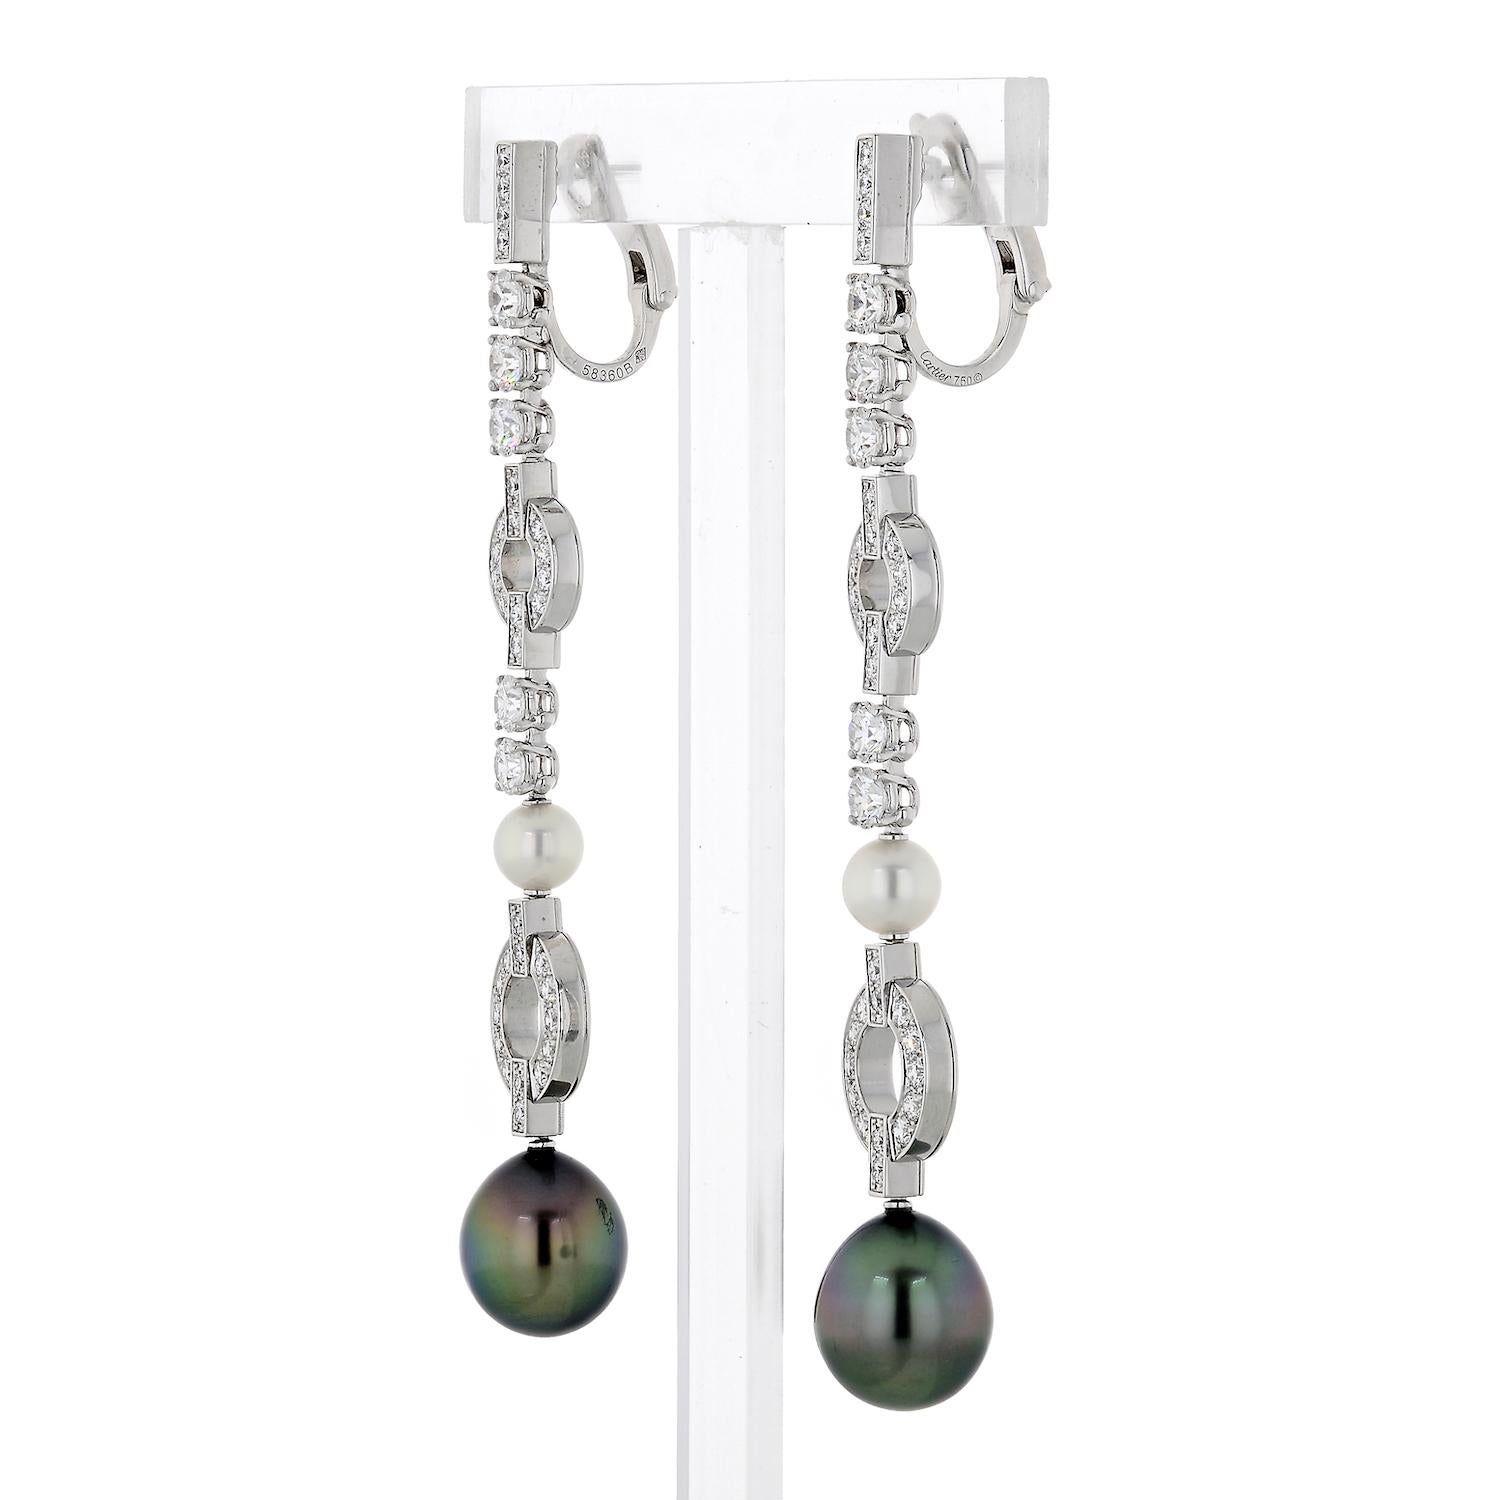 A striking pair of Cartier diamond drop earrings featuring black and white pearls nestled in 18k White Gold that is decorated in approximately 4.18 carats of diamonds. These Cartier diamond drop earrings are an amazing 3.25 inches in length and are